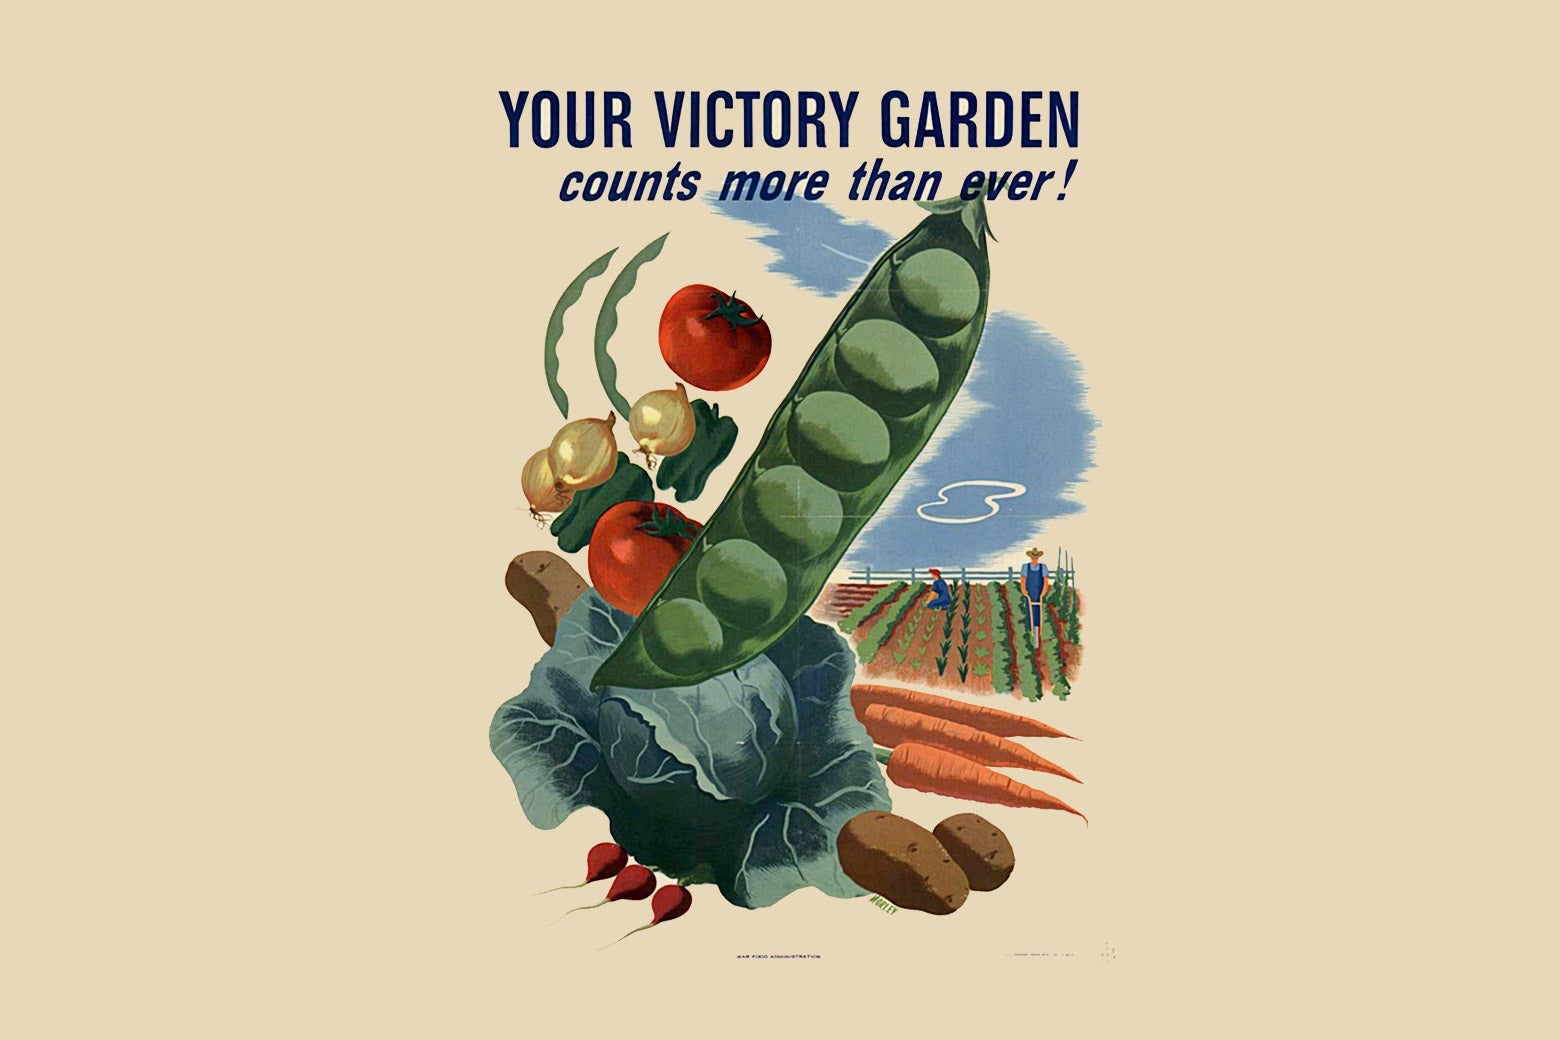 A poster reads "Your victory garden counts more than ever!" over images of vegetables.